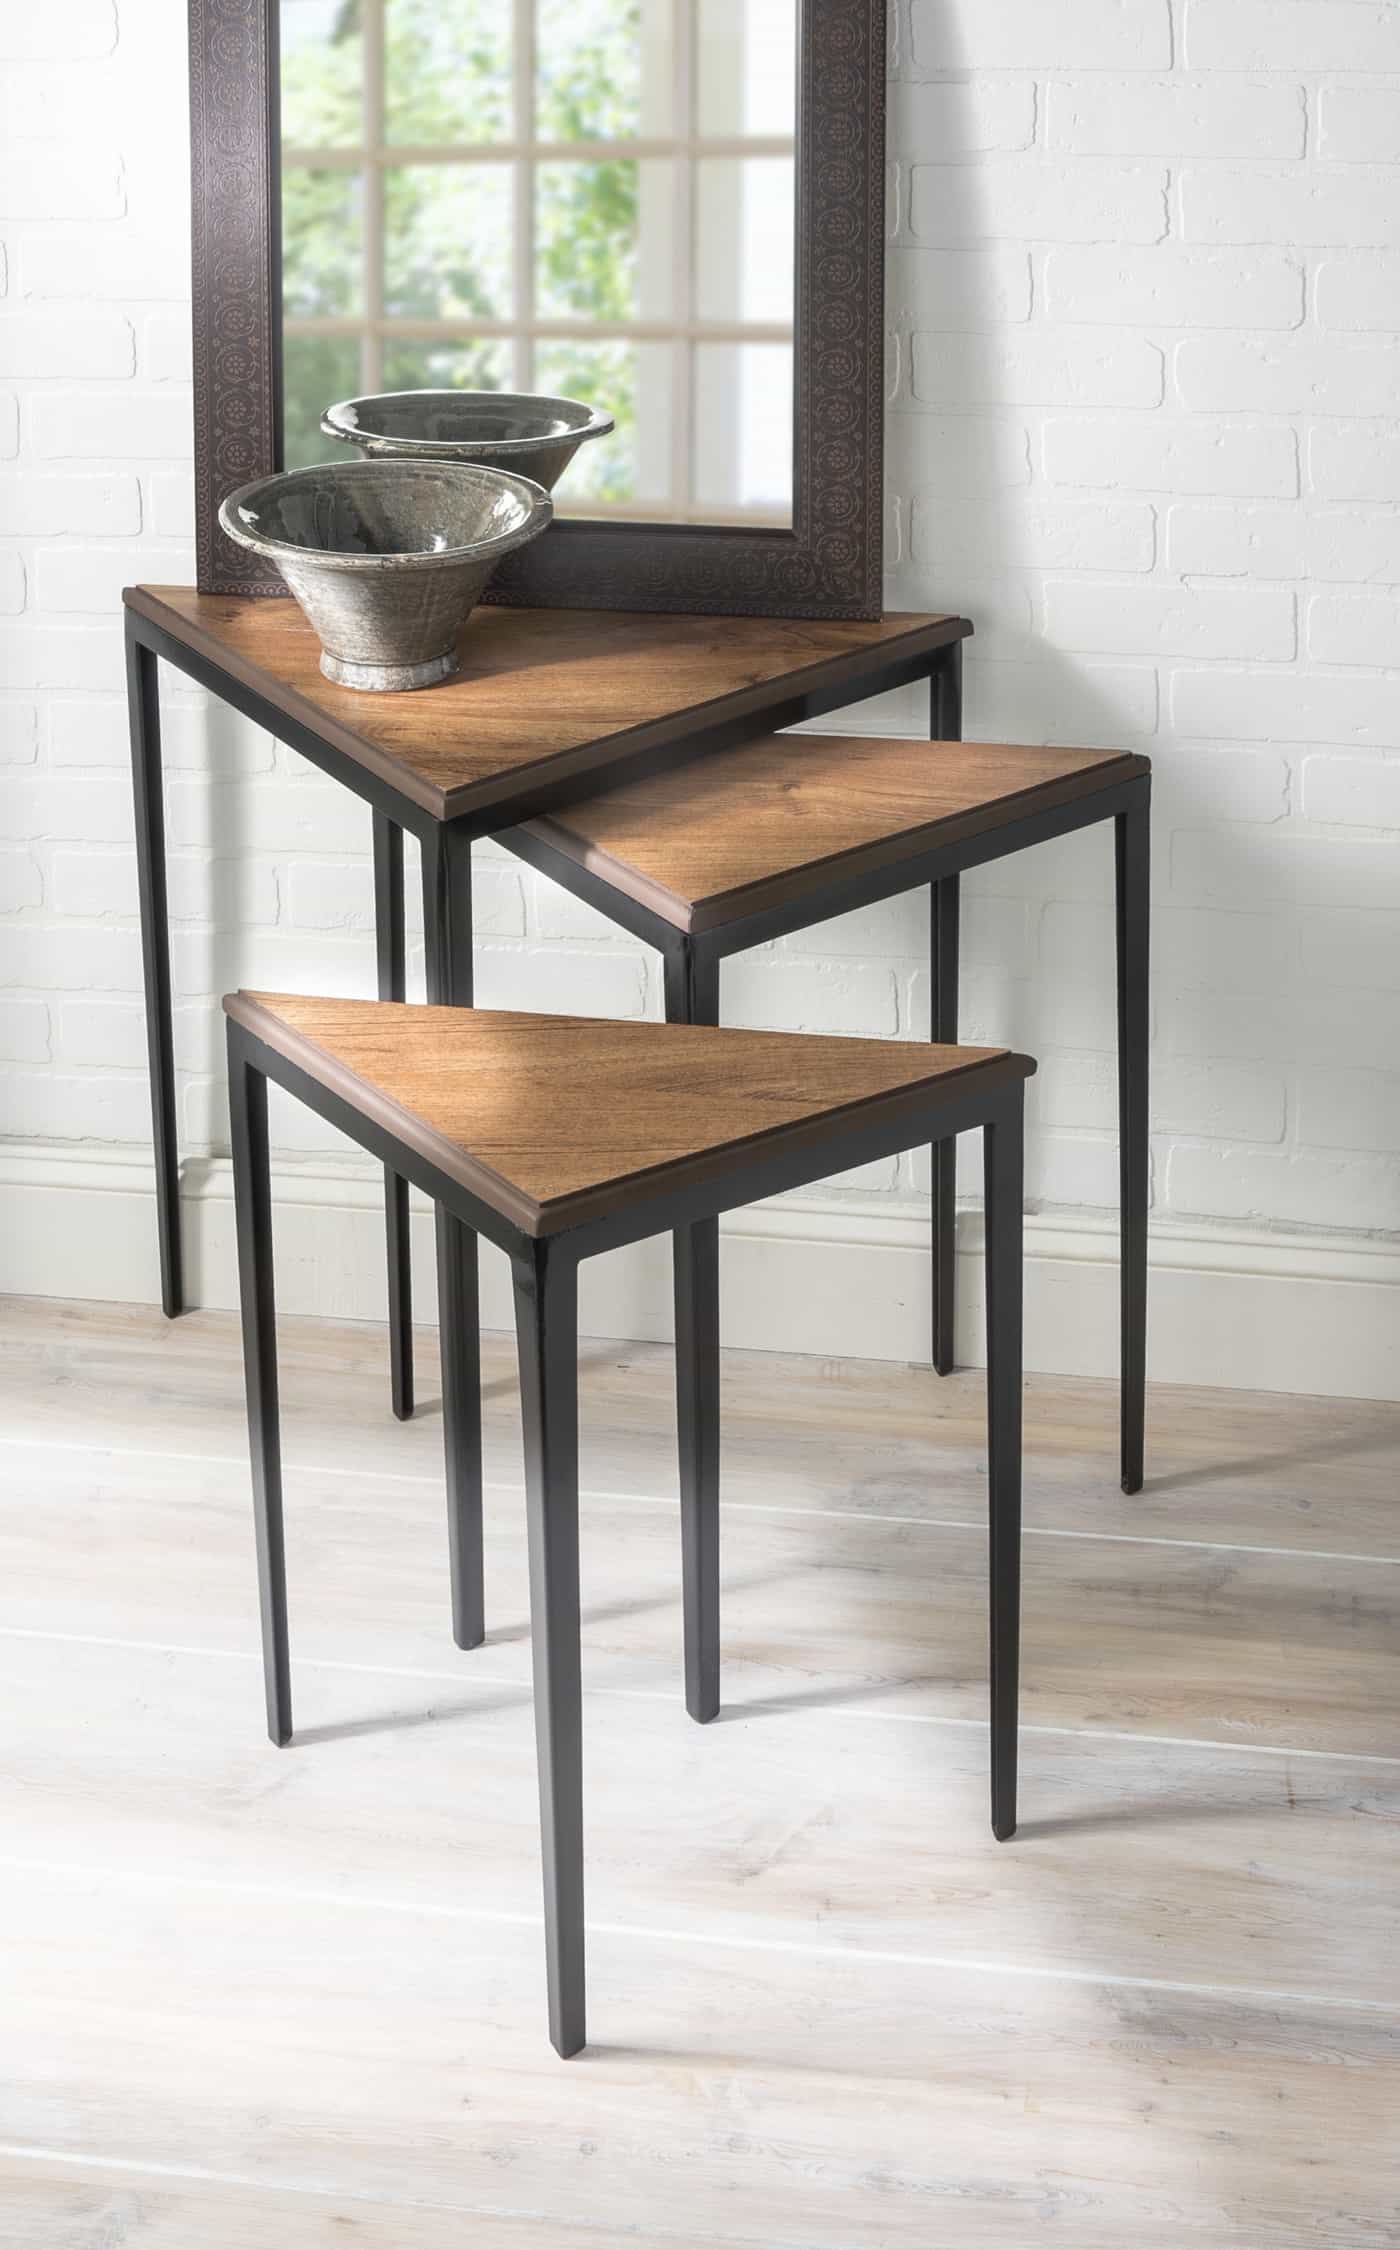 Learn how to revamp nesting tables using vinyl flooring! Leftover flooring makes a perfectly resilient and cost effective tabletop. We love the results!